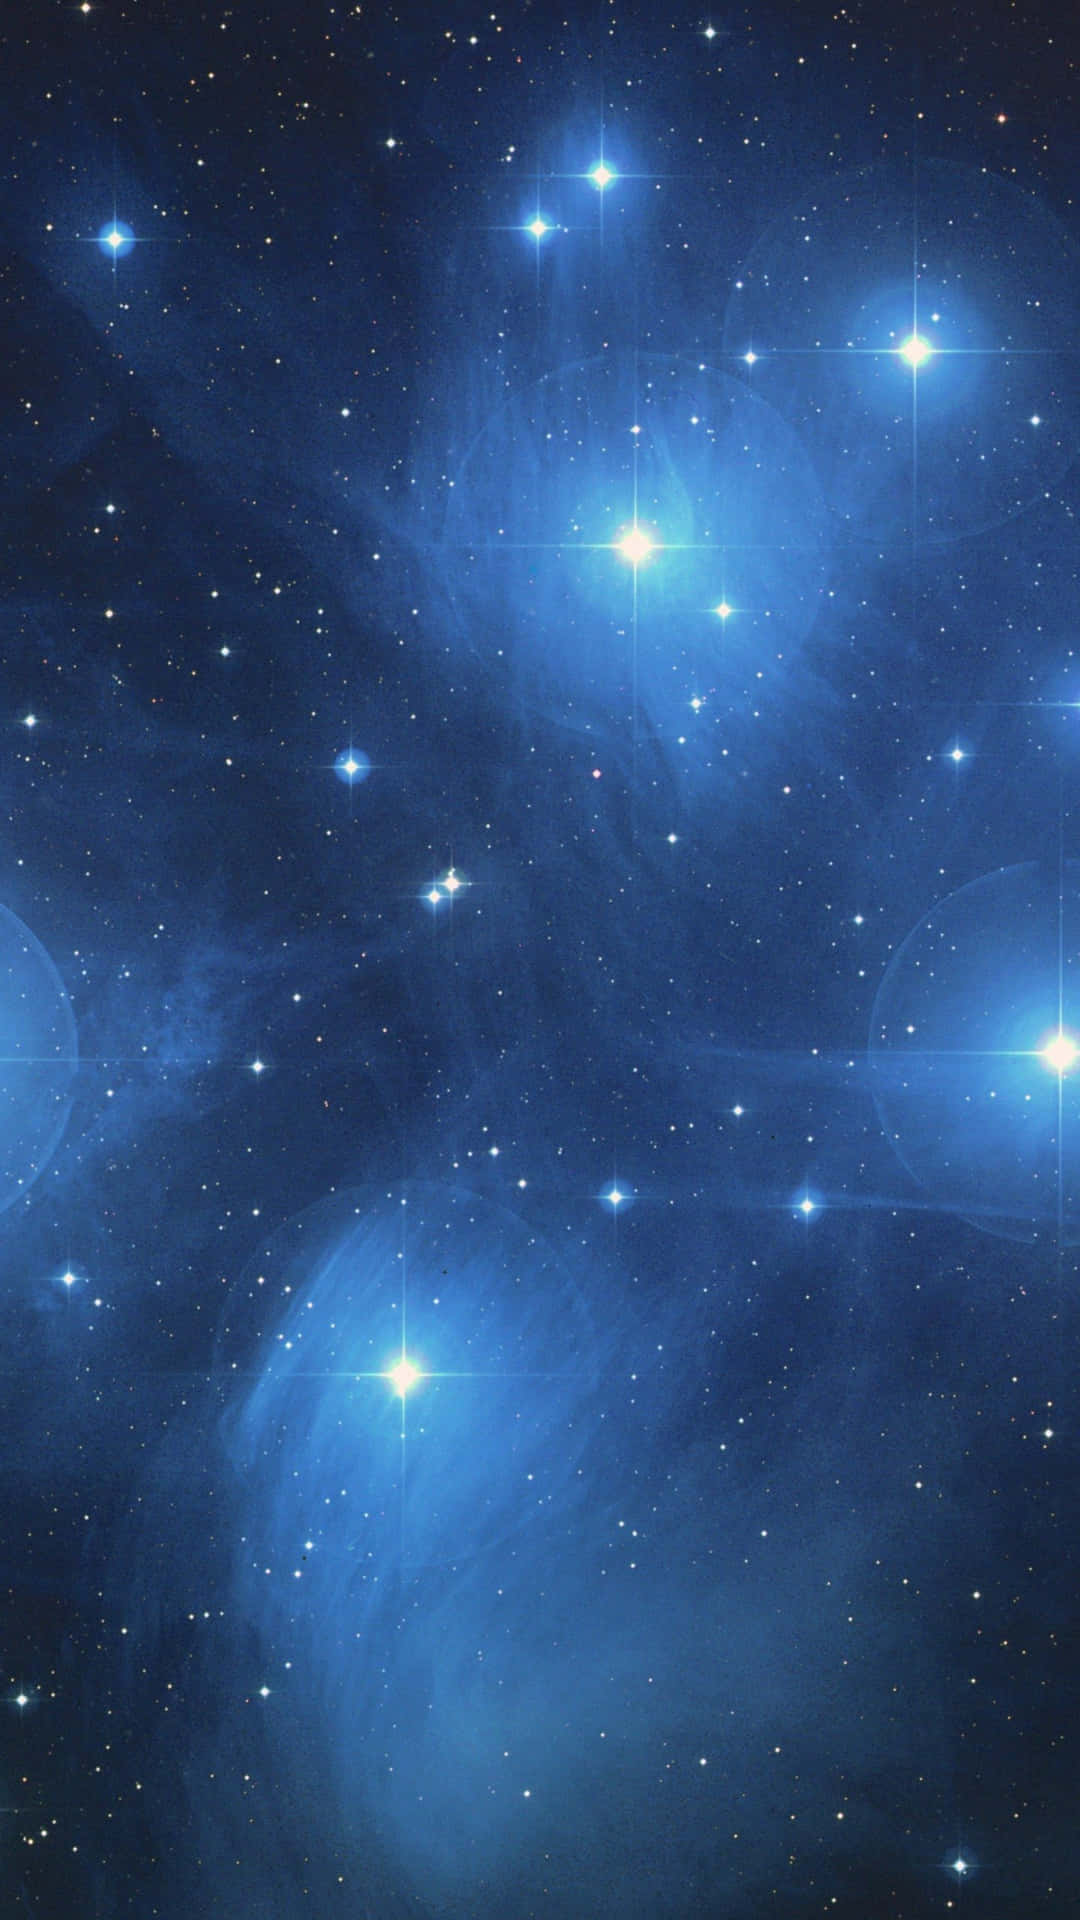 Stunning Star Cluster in the Cosmos Wallpaper